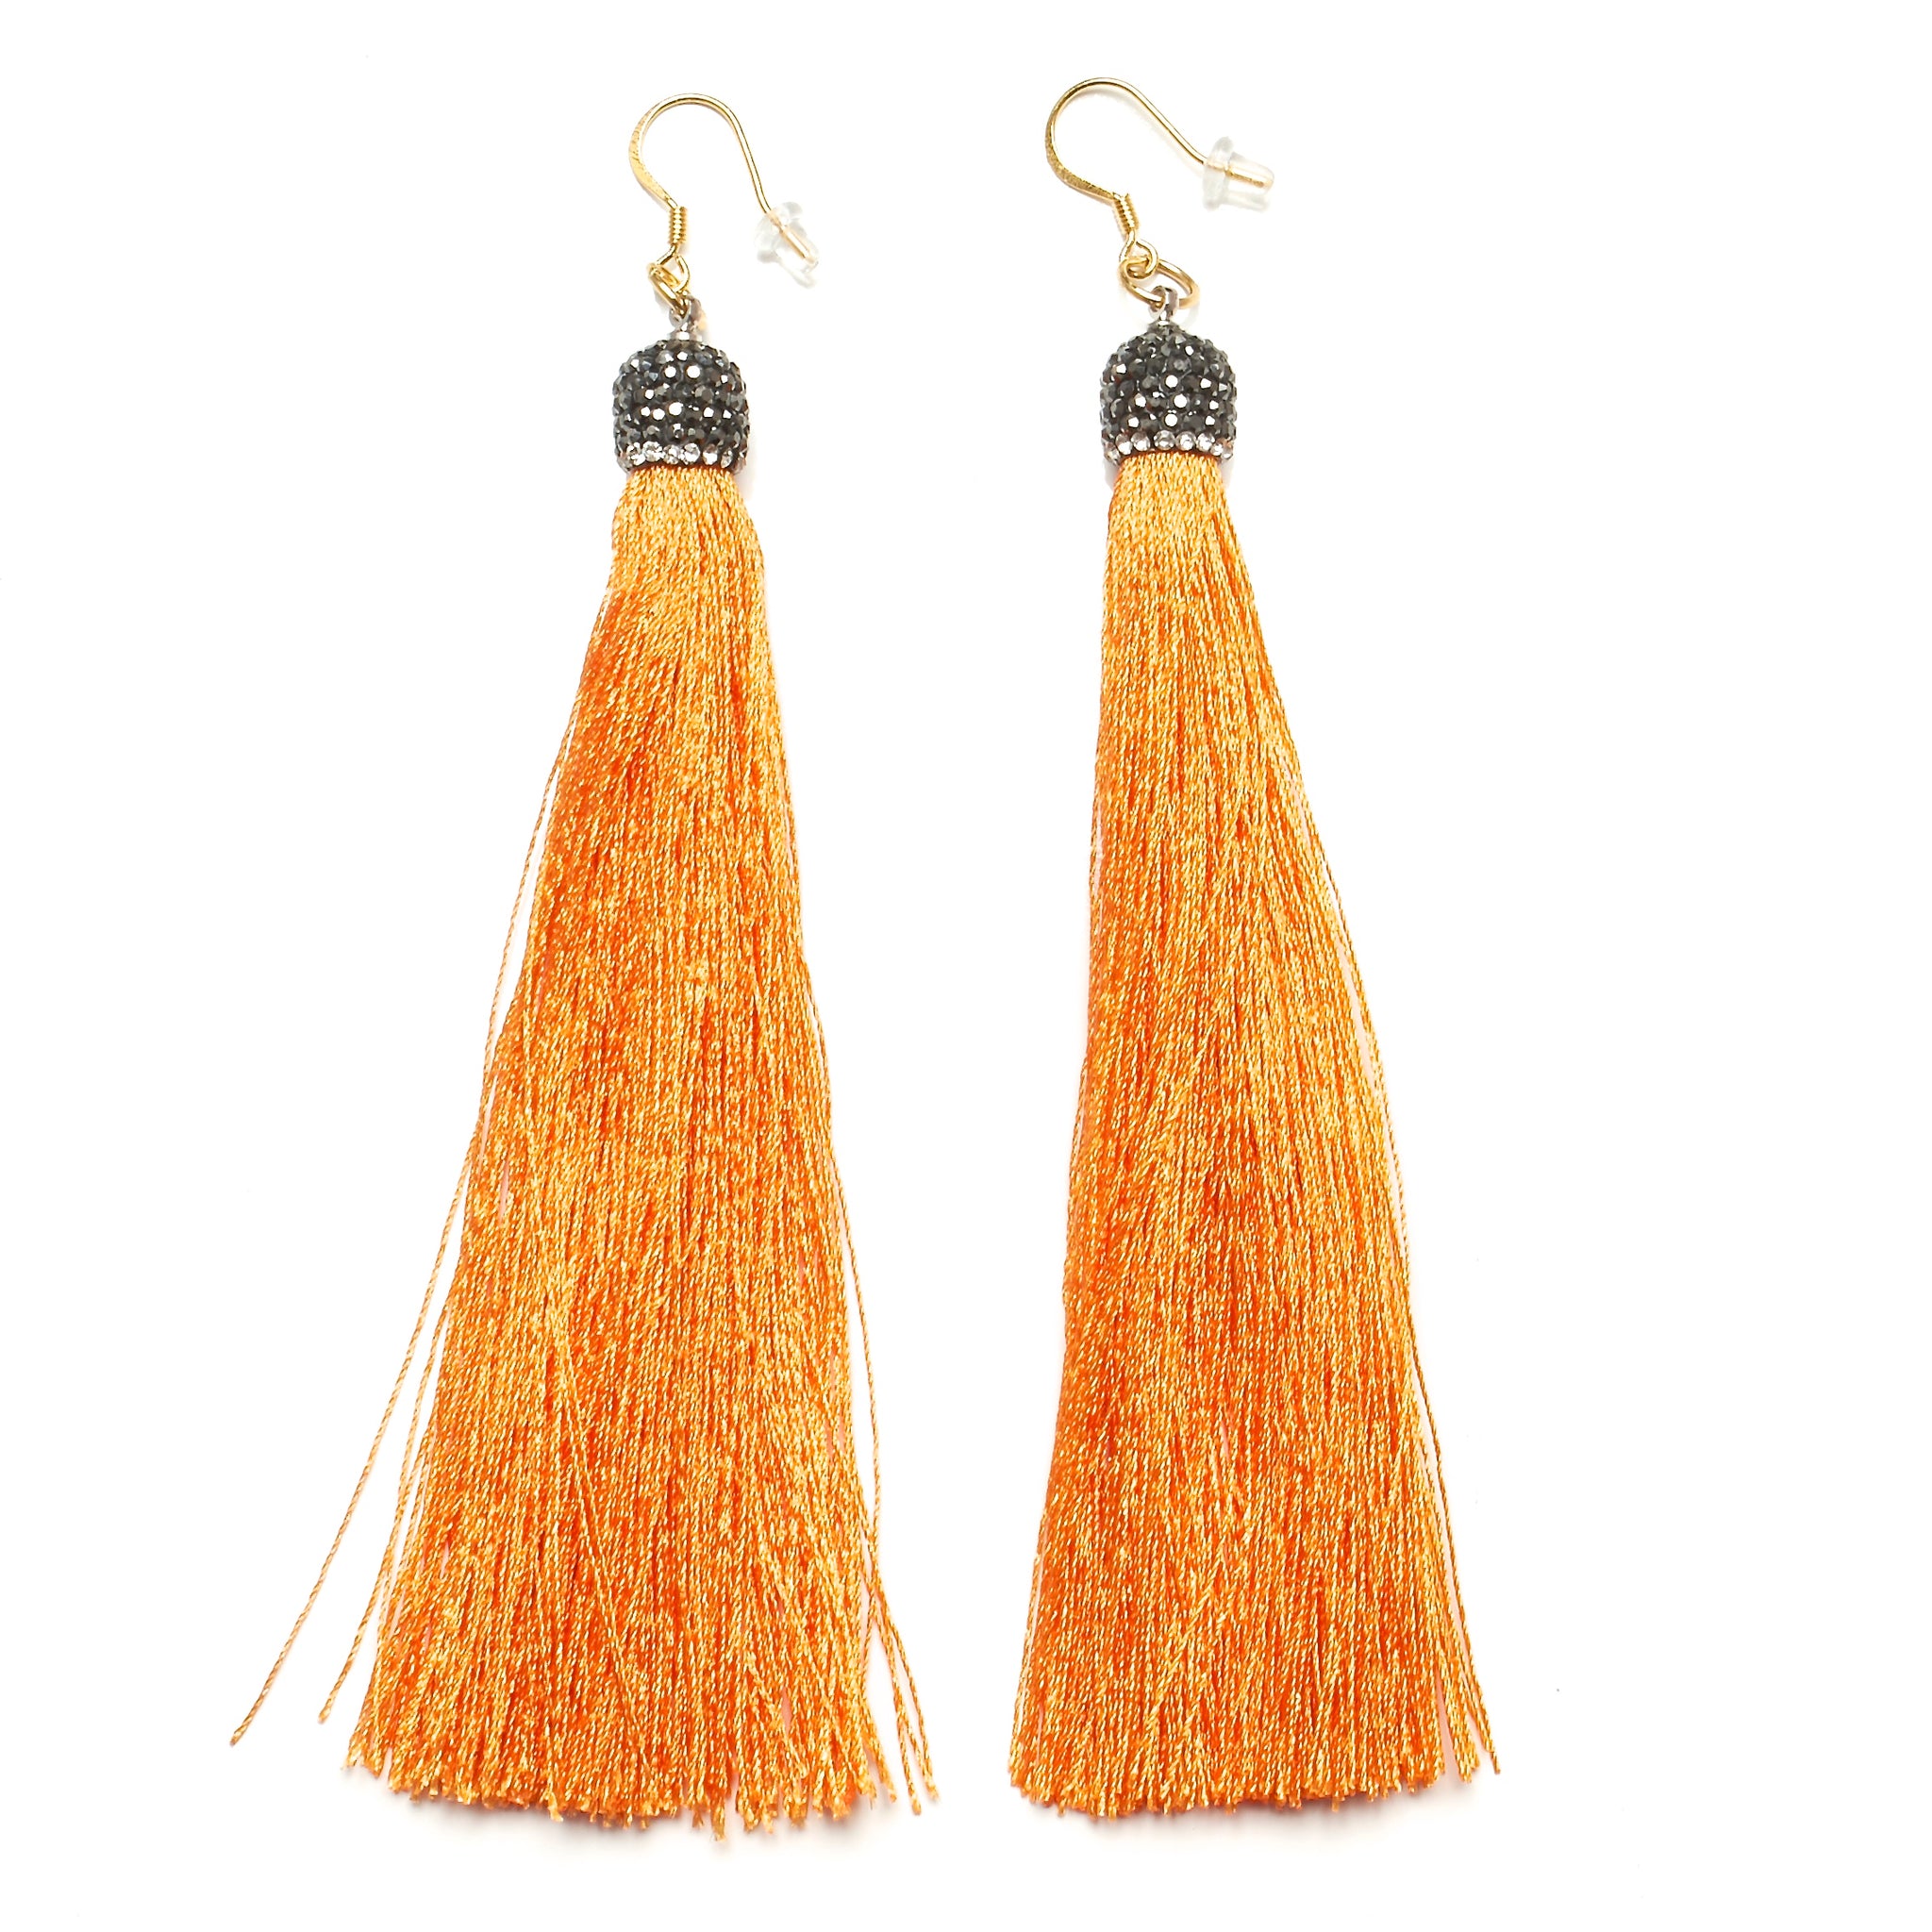 SILK TASSEL AND PAVE RHINESTONES EARRINGS by nyet jewelry